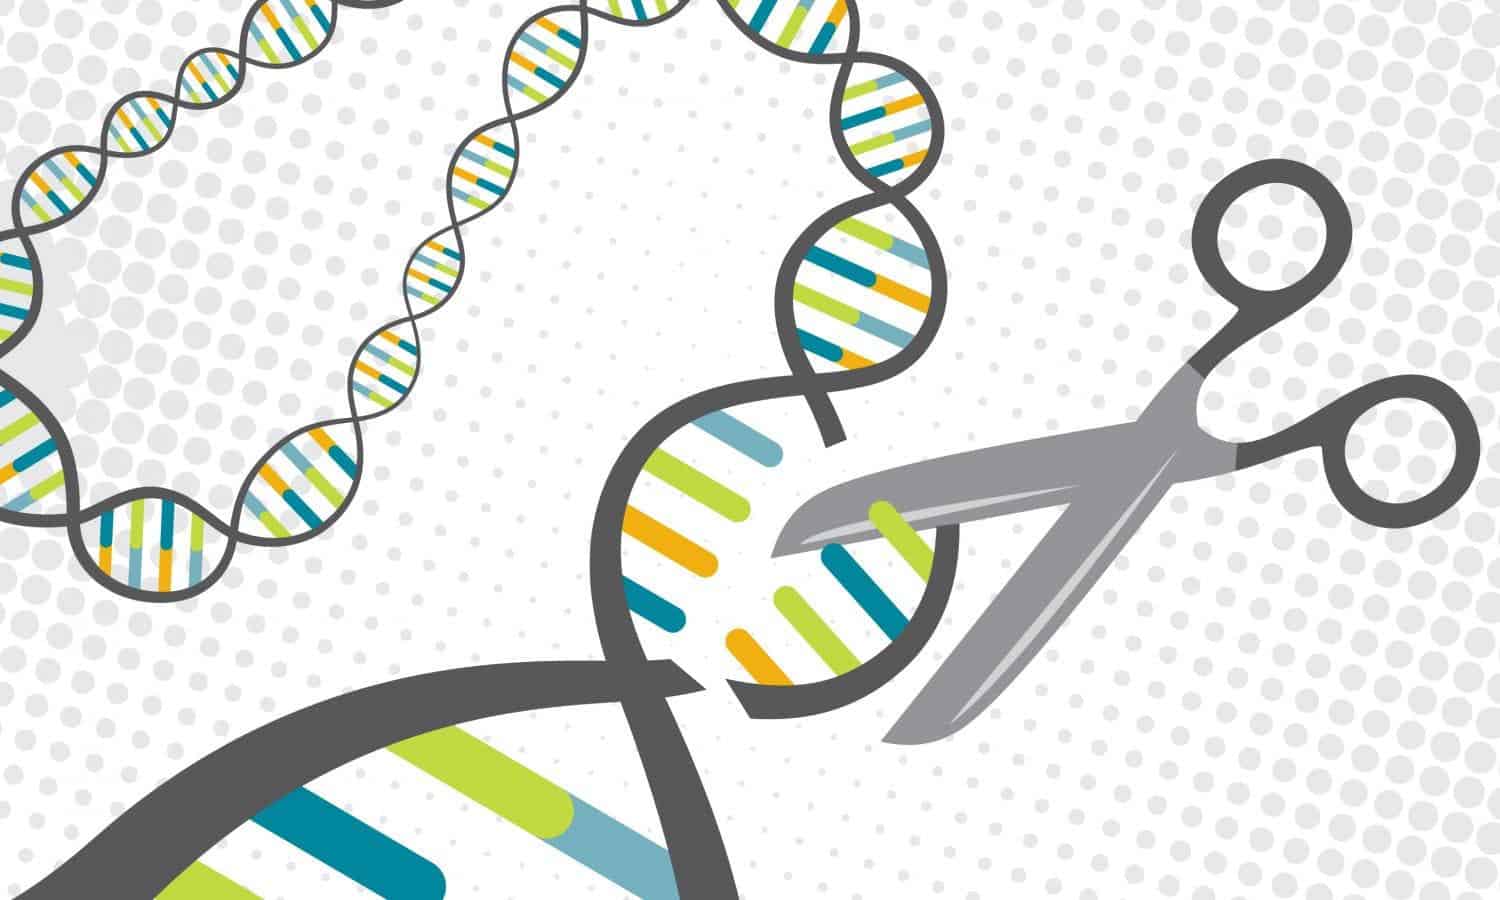 A CRISPR protein targets specific sections of DNA and cuts them. Credit: Univ. of Texas at Austin.